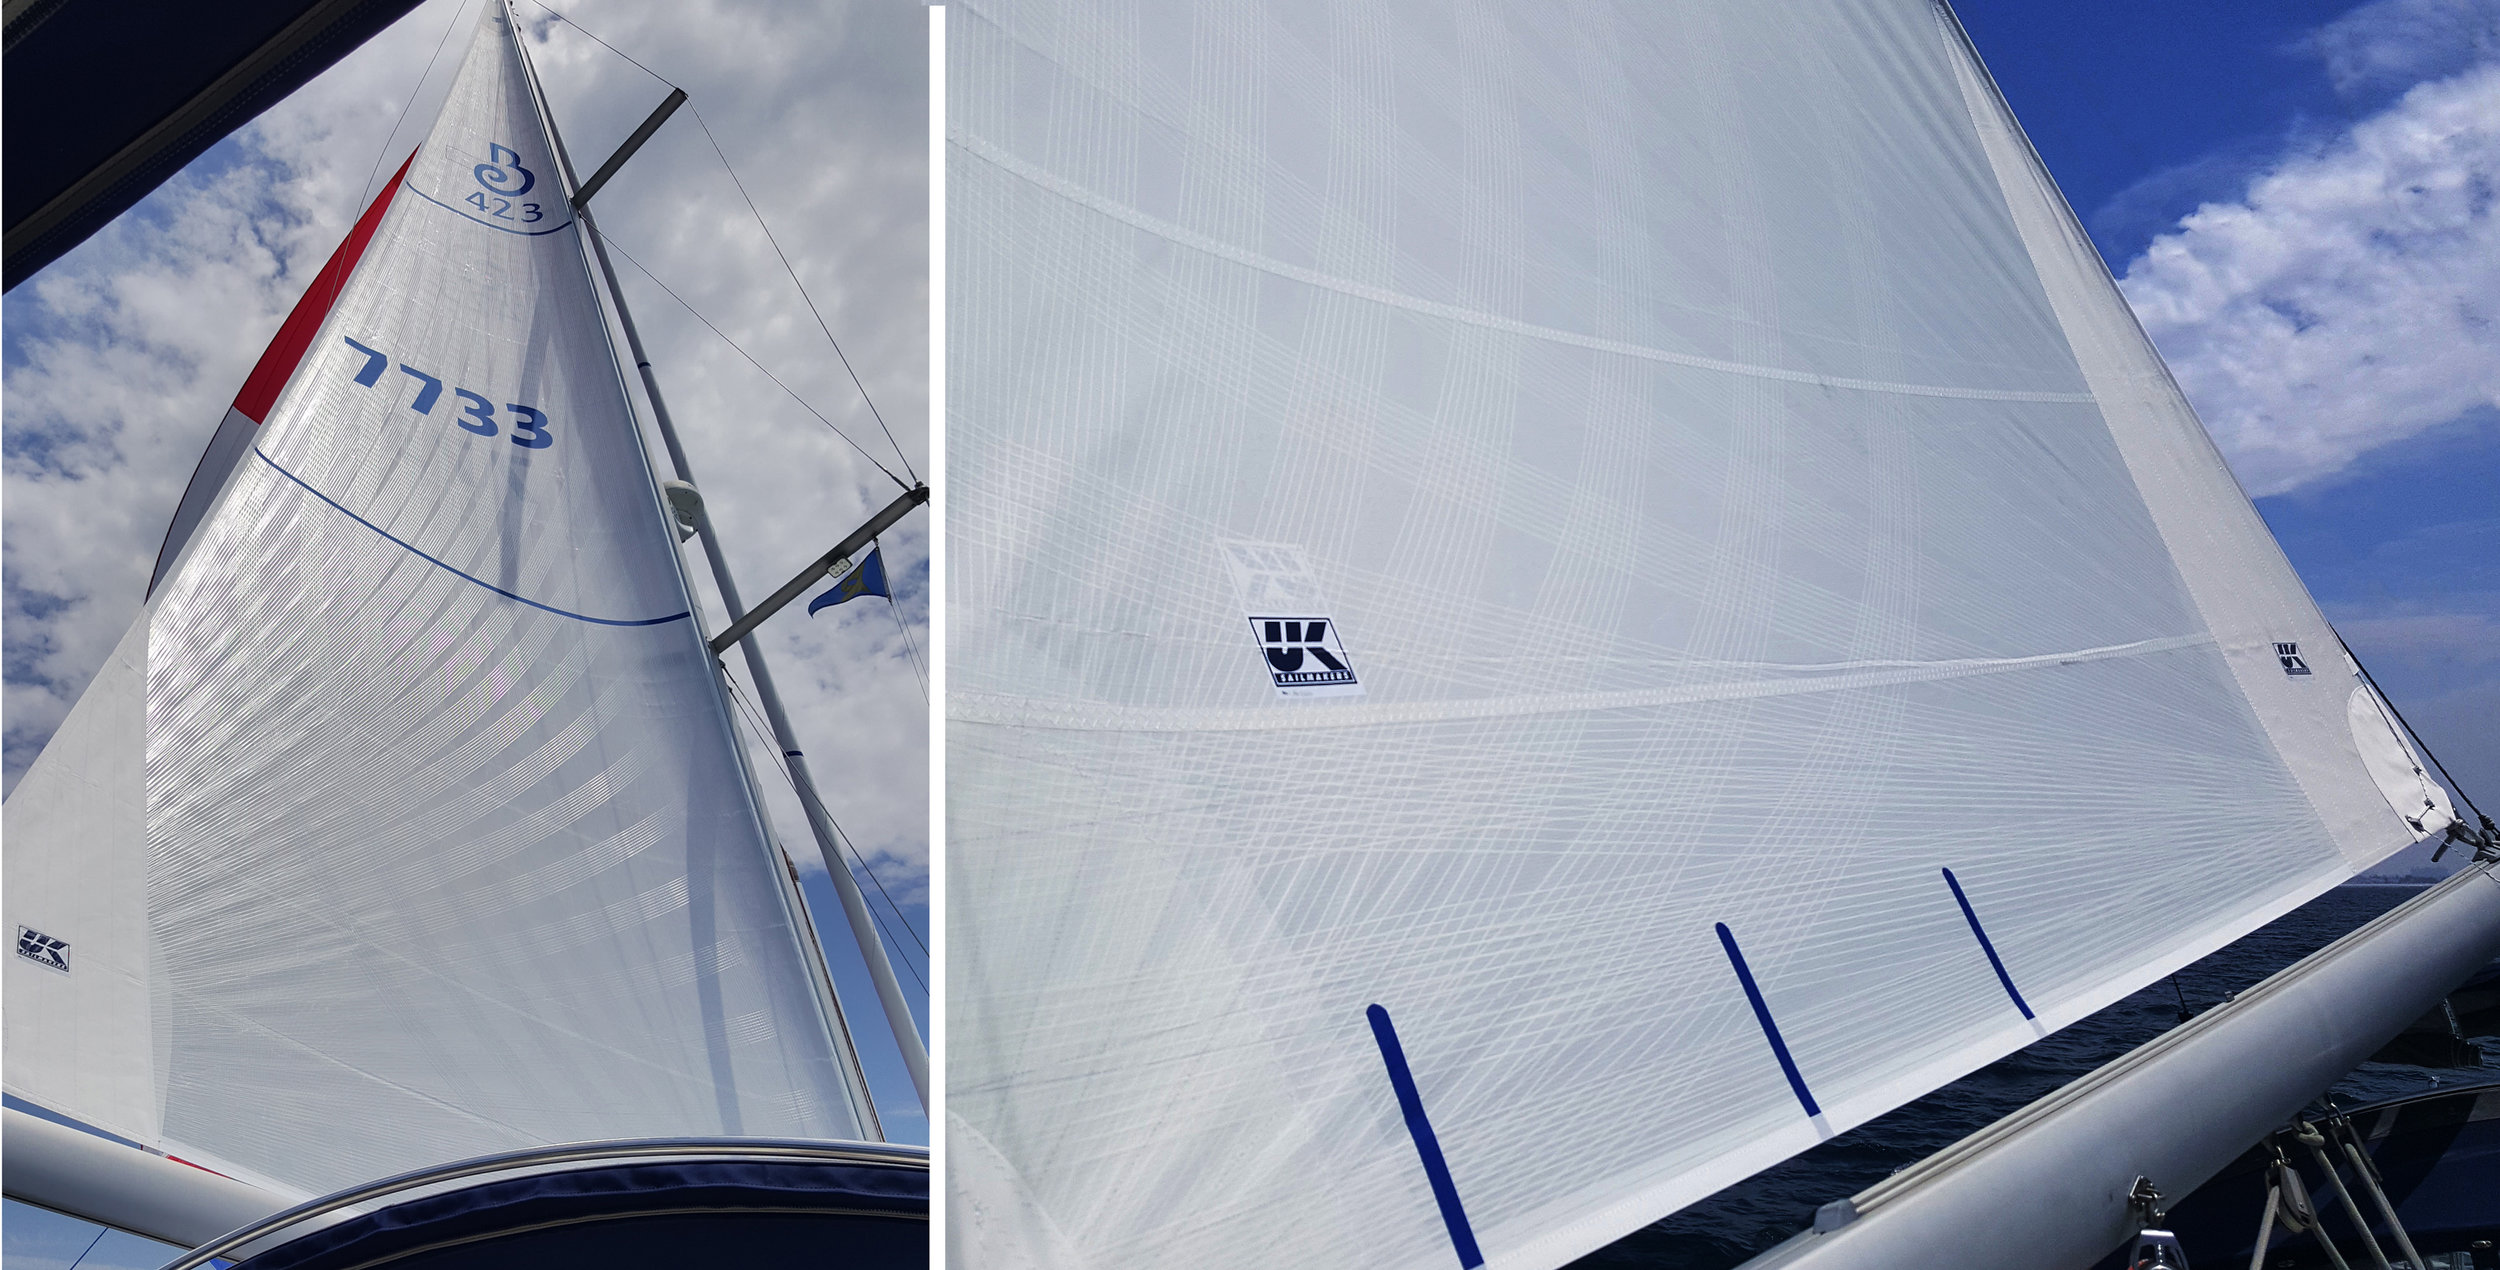 For cruising sailors looking for durability and performance, nothing beats UK Sailmakers' X-Drive sails made with hundreds of high strength tapes reinforcing nearly 100% of the sail's surface. We offer tapes made with S-Glass yarns or Endumax filame…